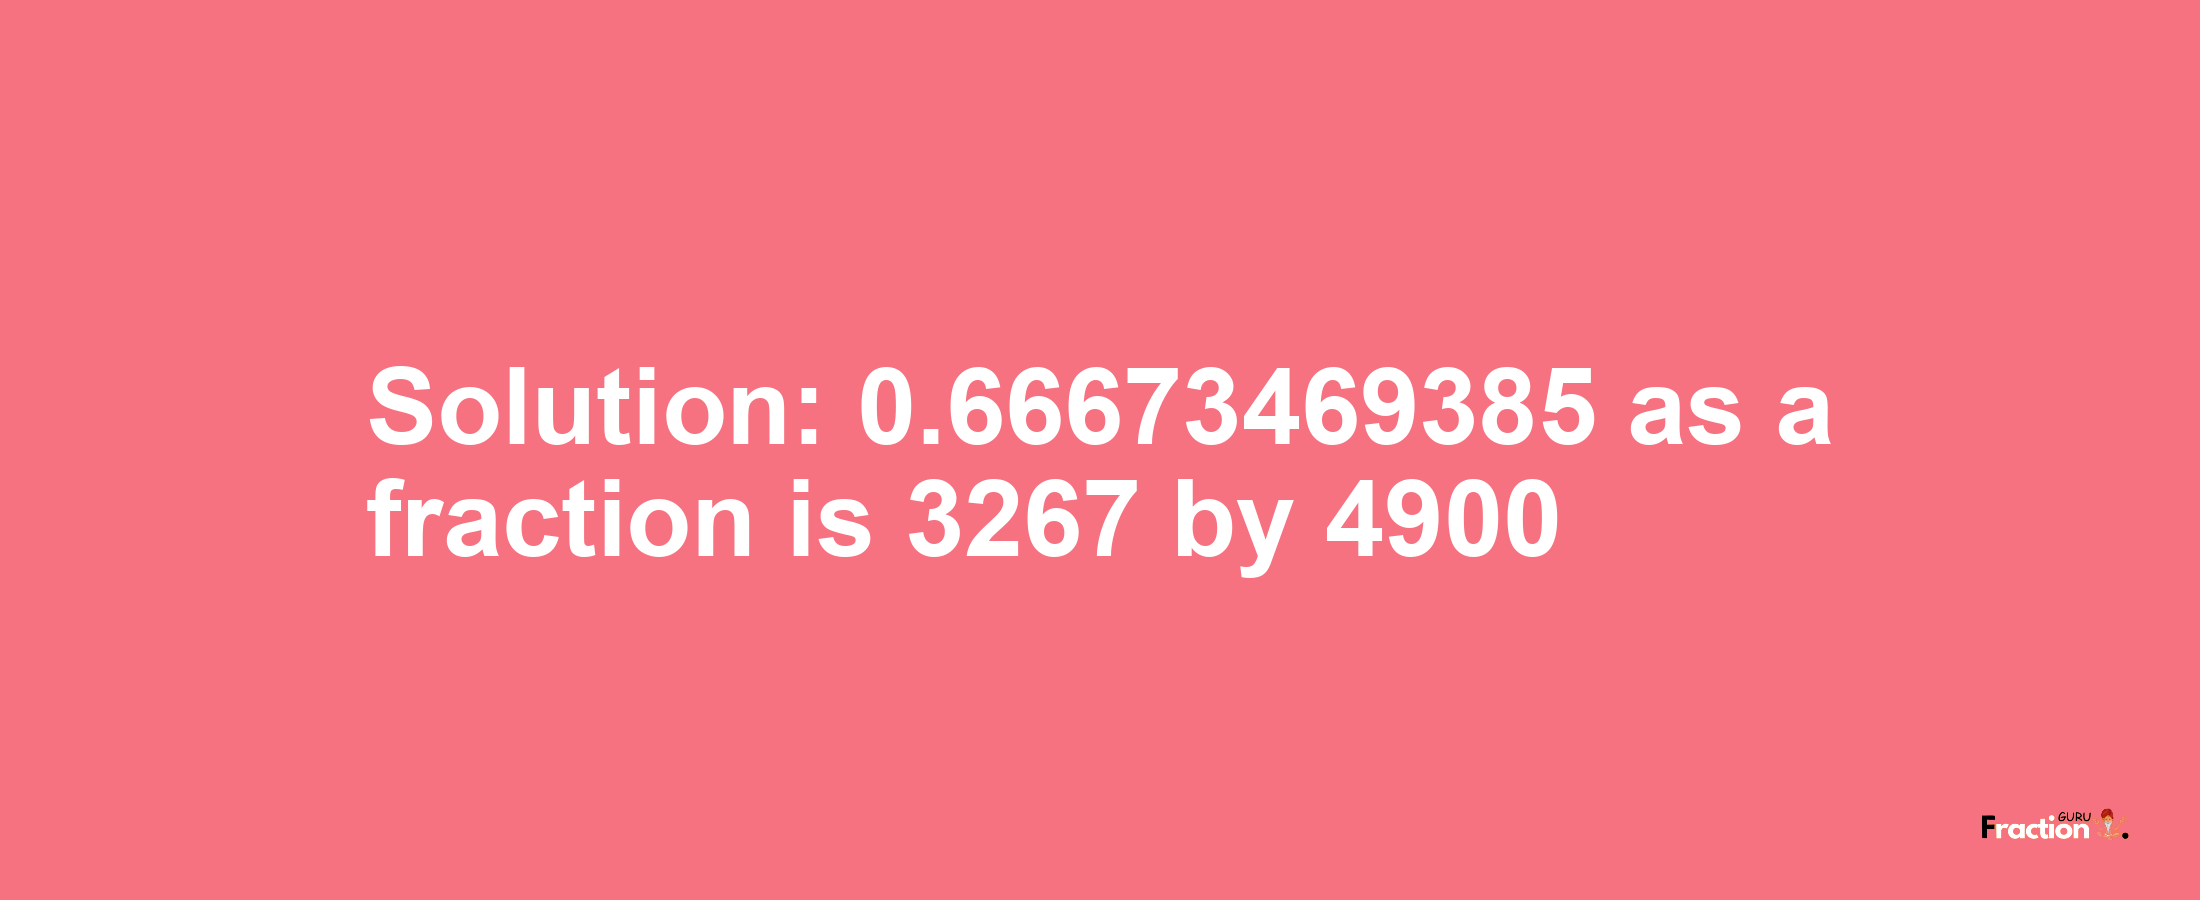 Solution:0.66673469385 as a fraction is 3267/4900